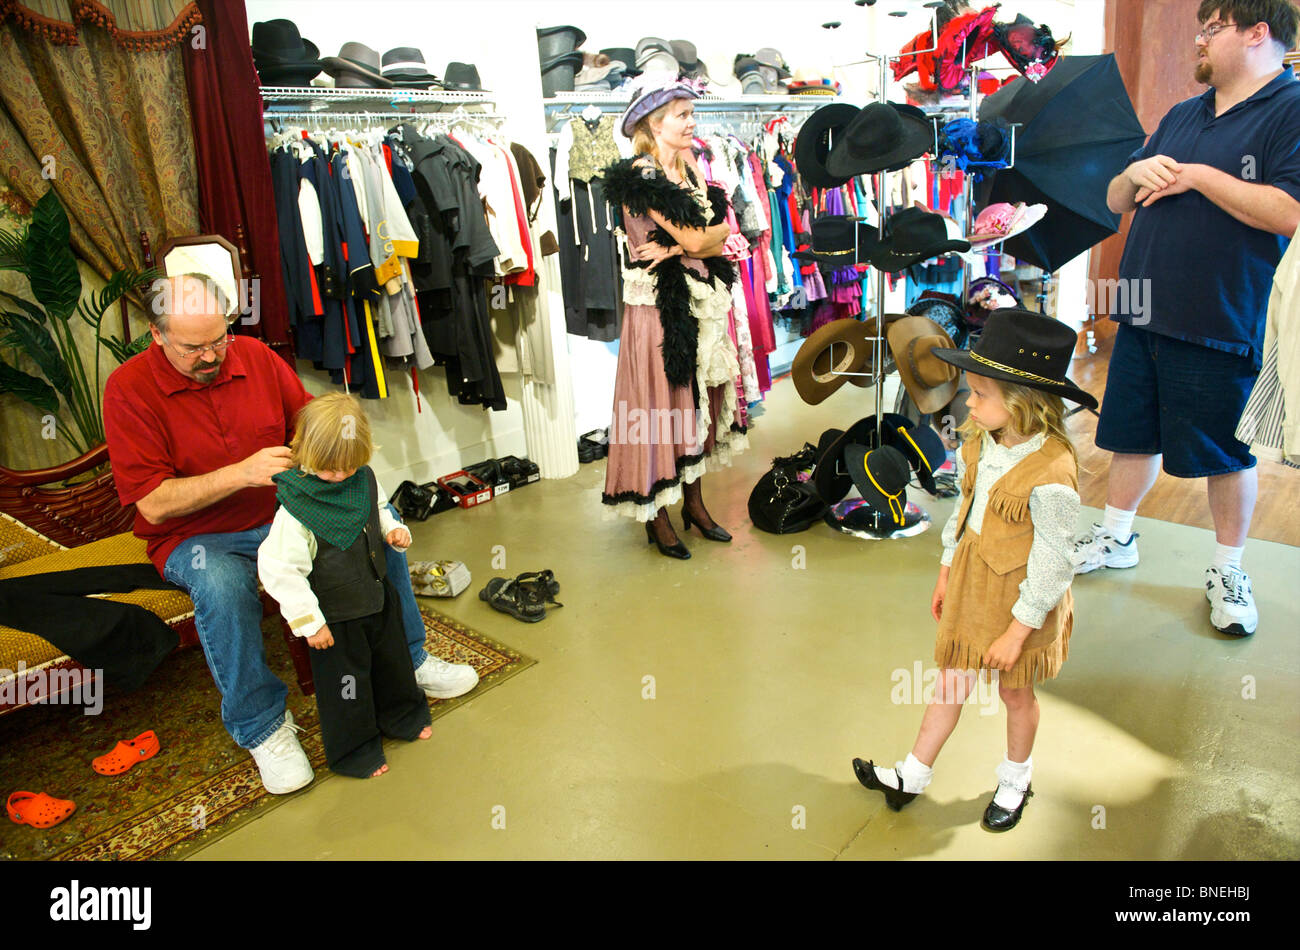 Tourist family getting ready in western style at Wildwest clothing for photo shoot in Galveston, USA Stock Photo